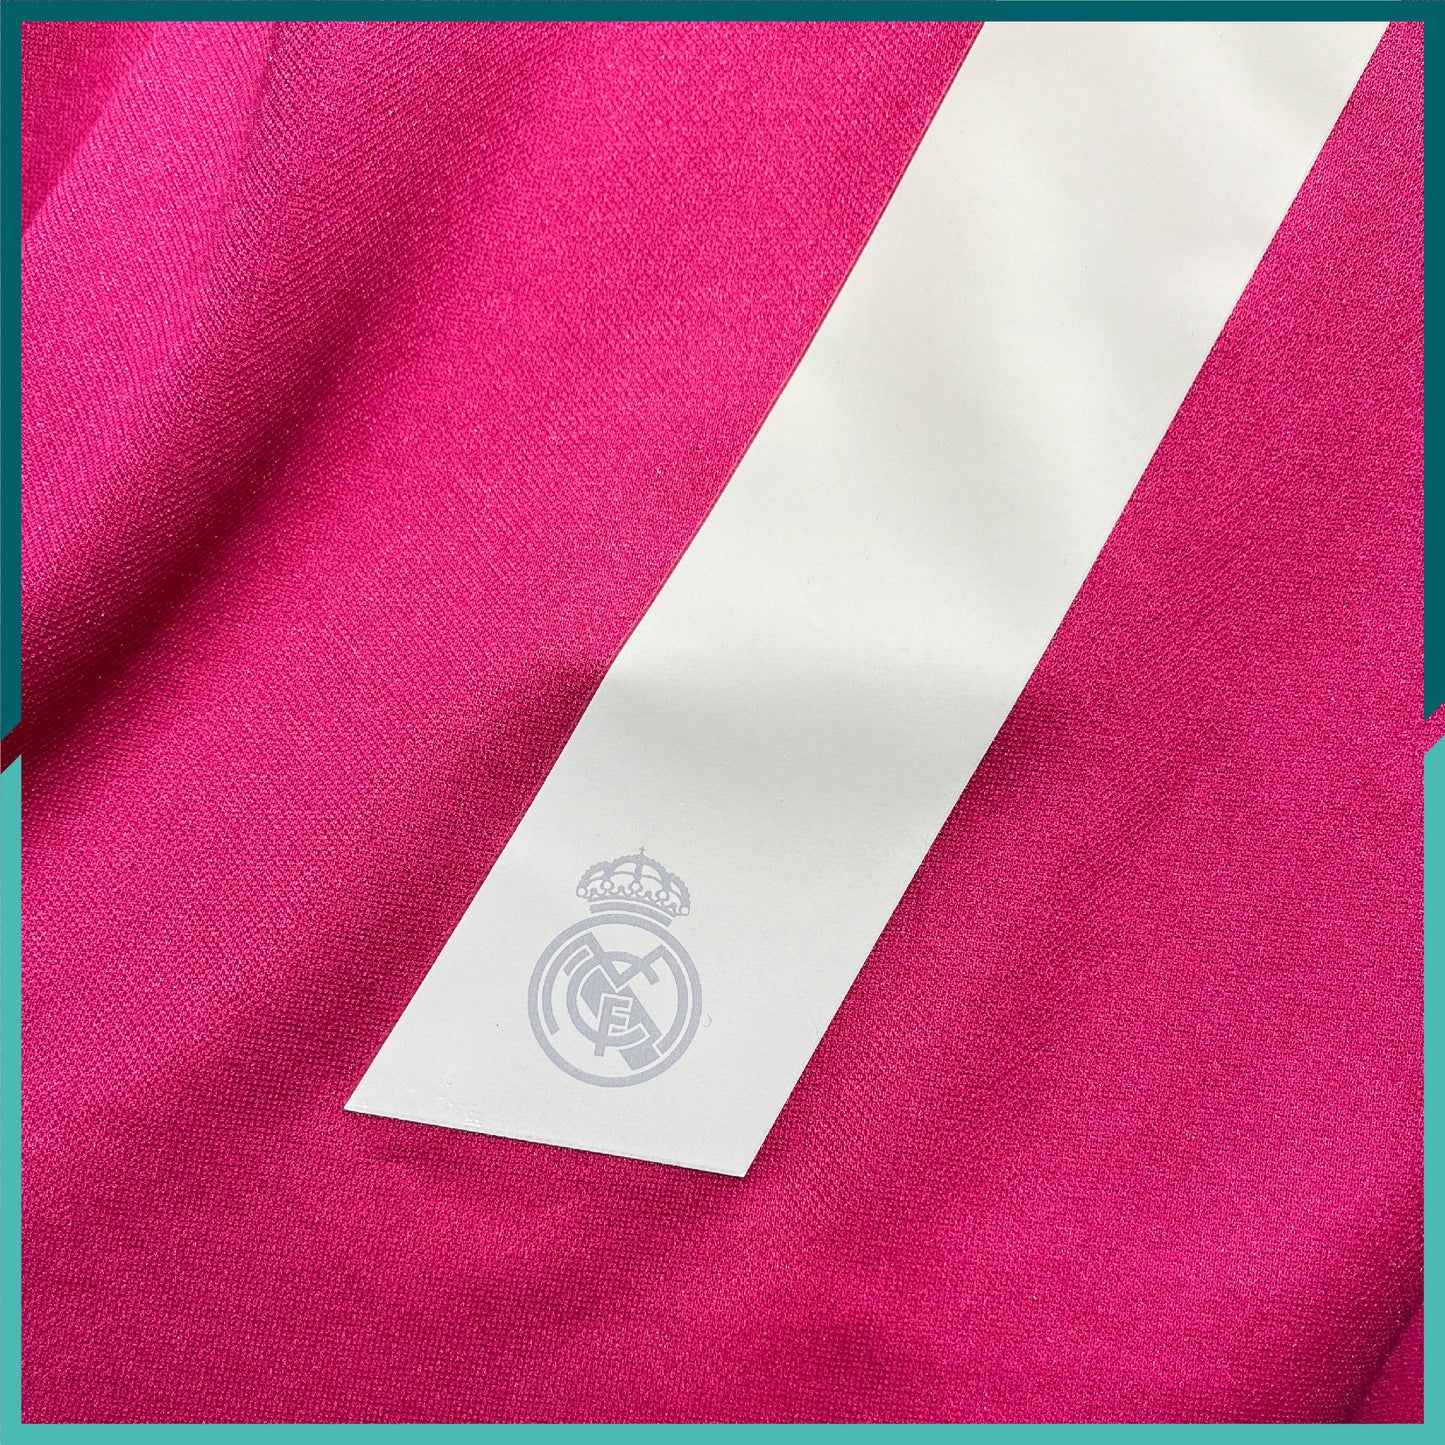 [Nameset Included] Authentic 2014-15 Real Madrid Away Jersey